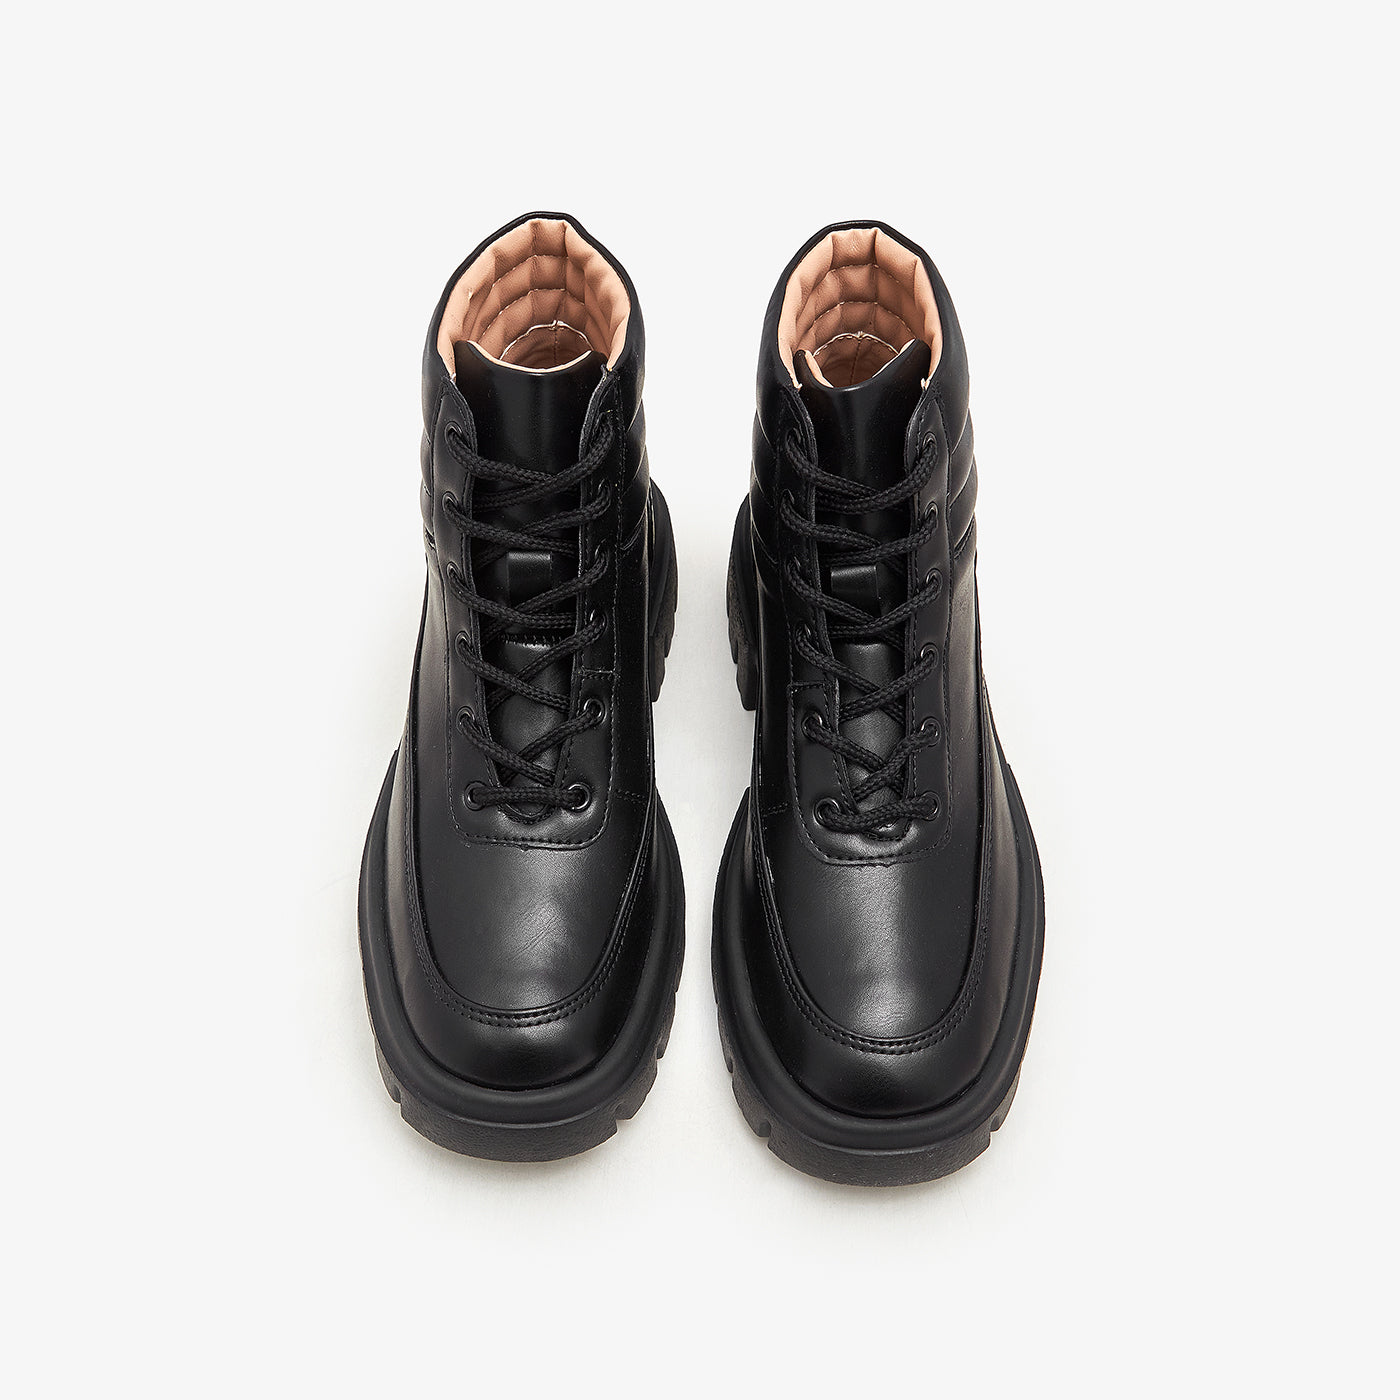 Combat Boots for Women